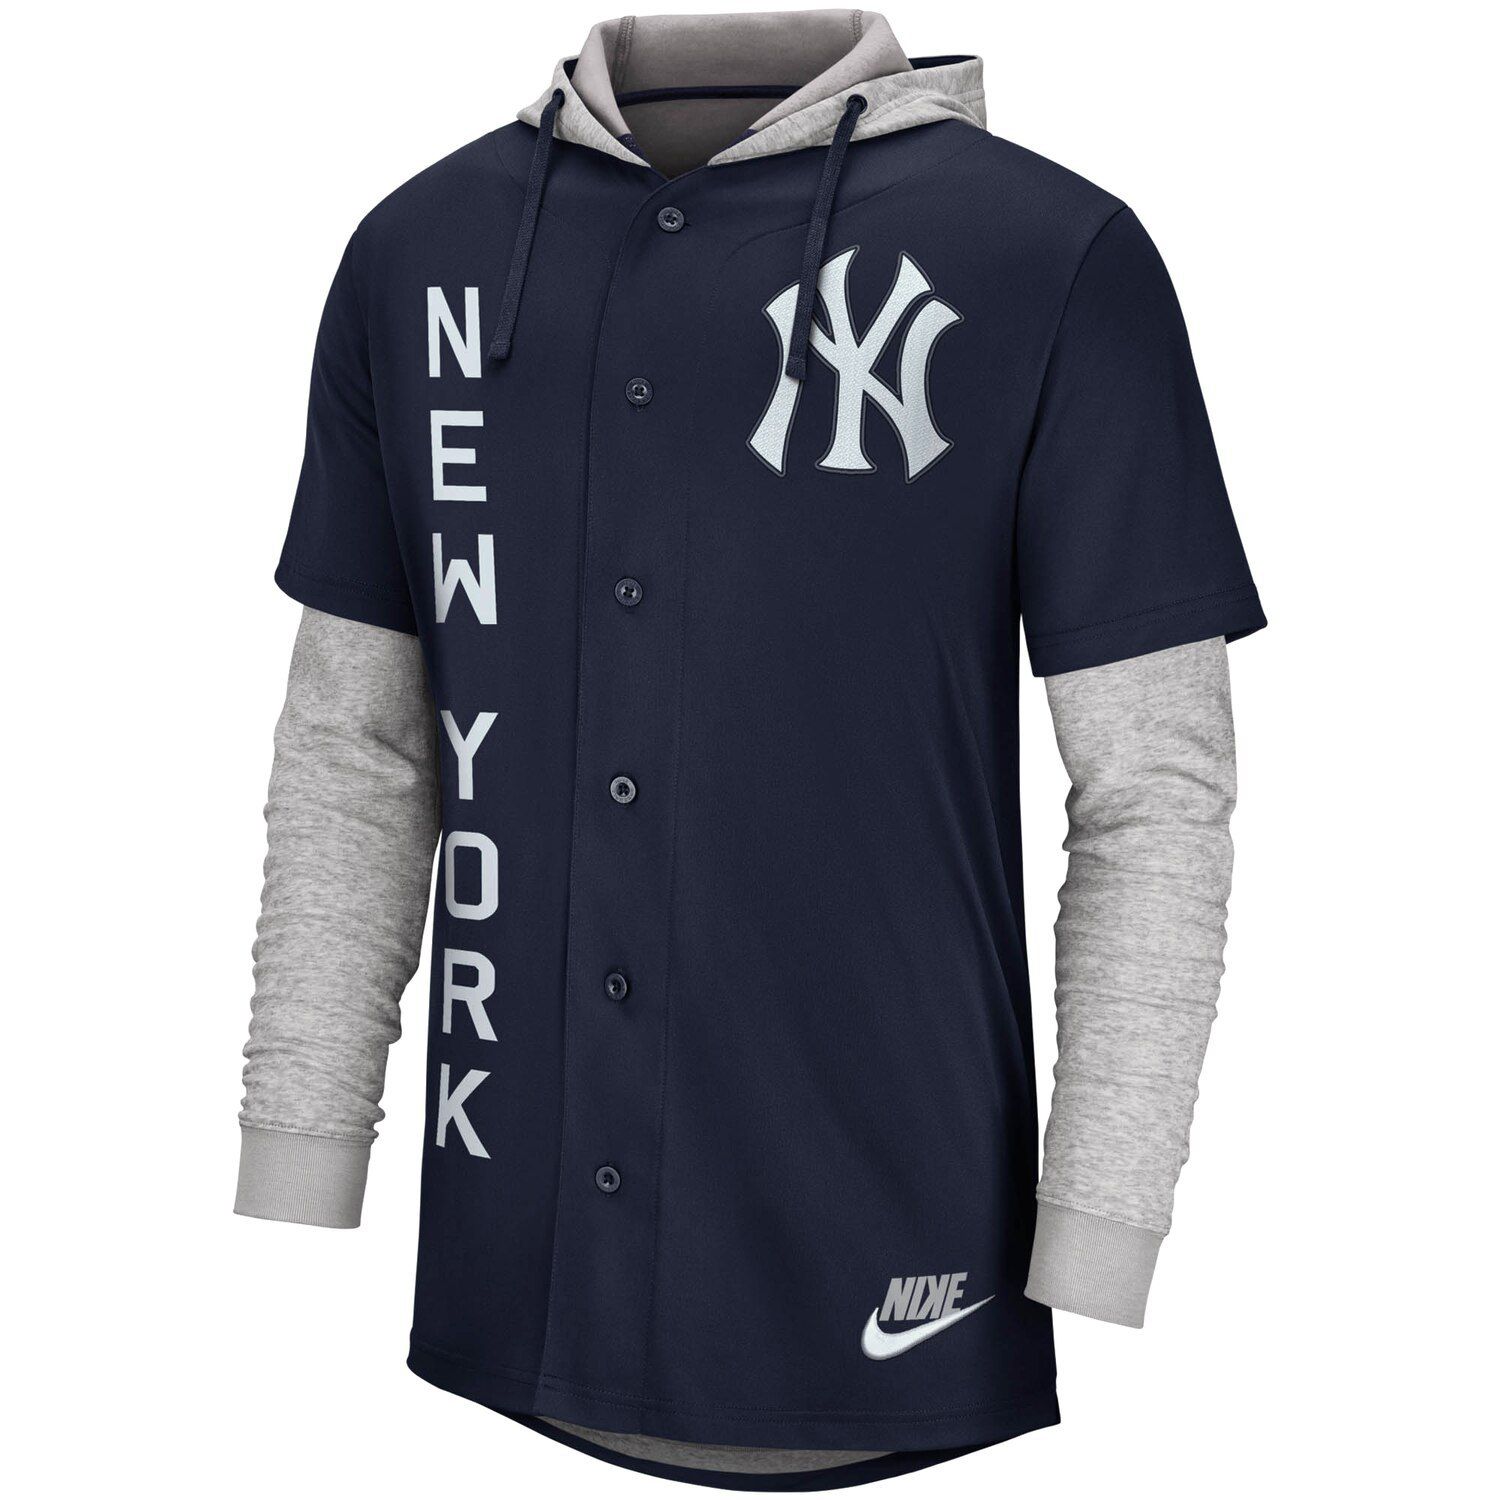 yankees button up jersey